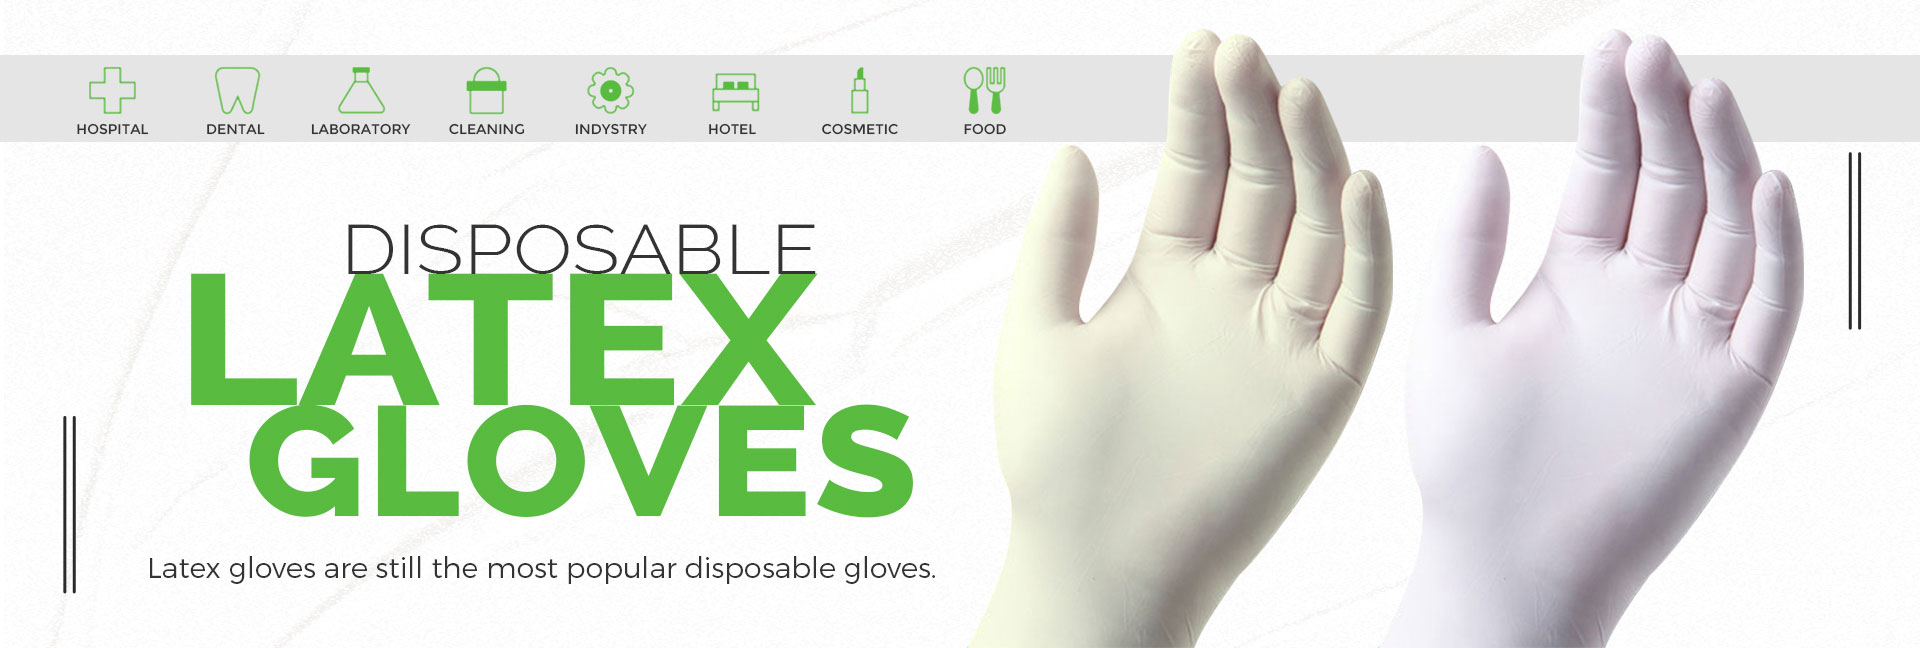 disposable-latex-gloves-banner